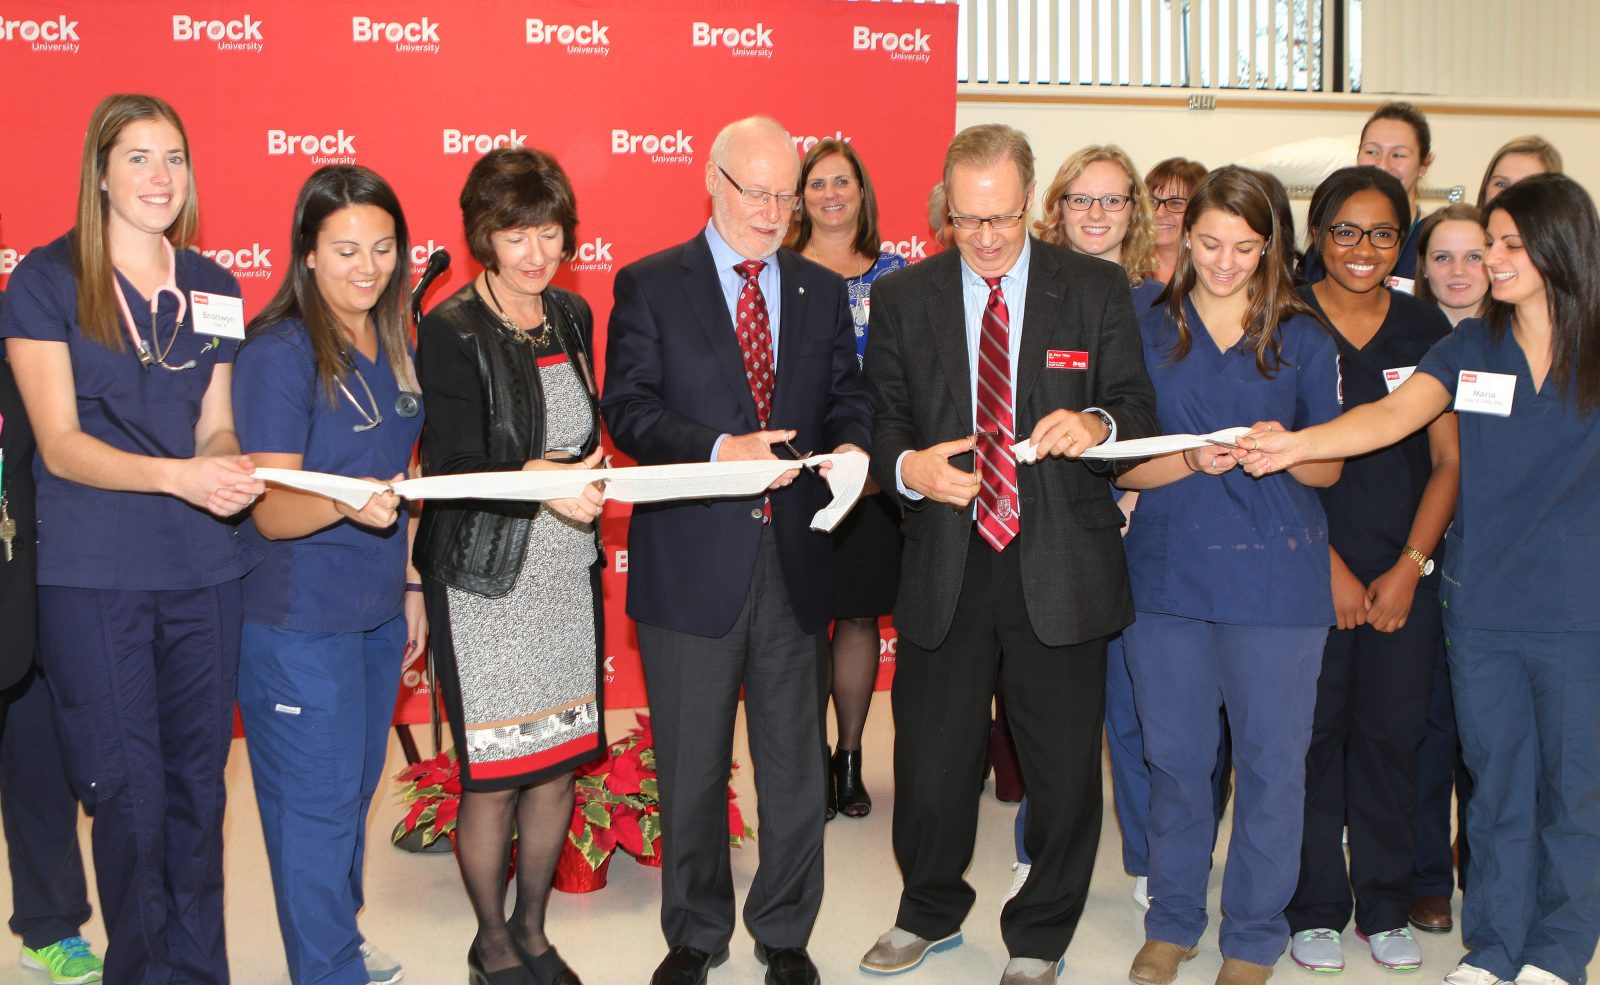 Brock nursing space doubled with high-tech lab expansion – The Brock News